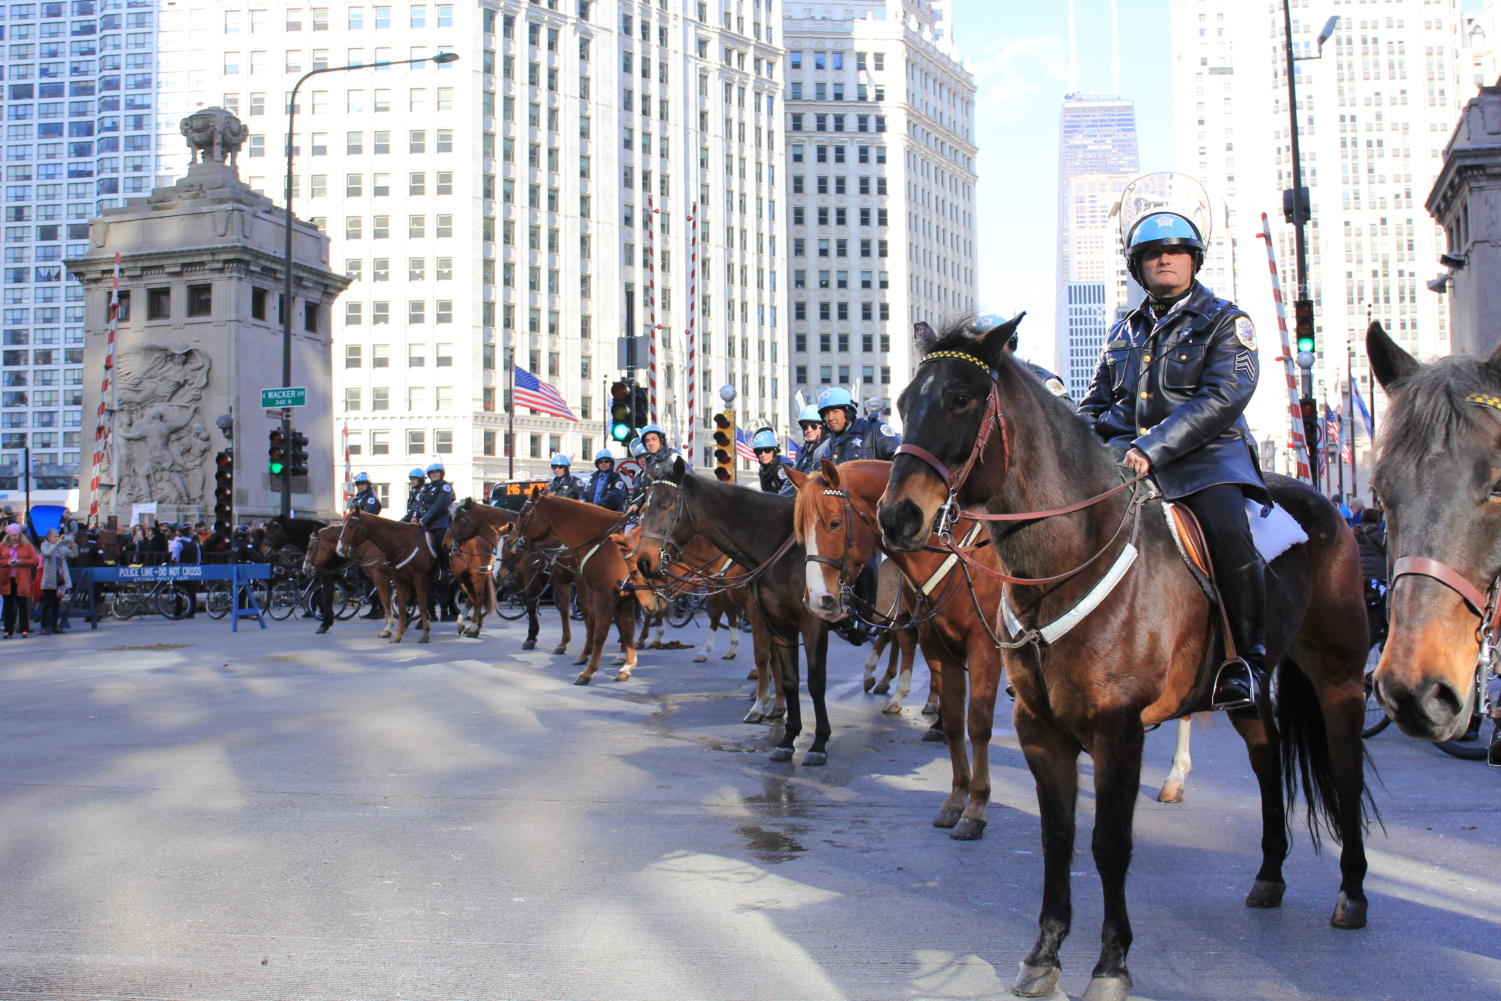 Police line up on horses to block off the protest.